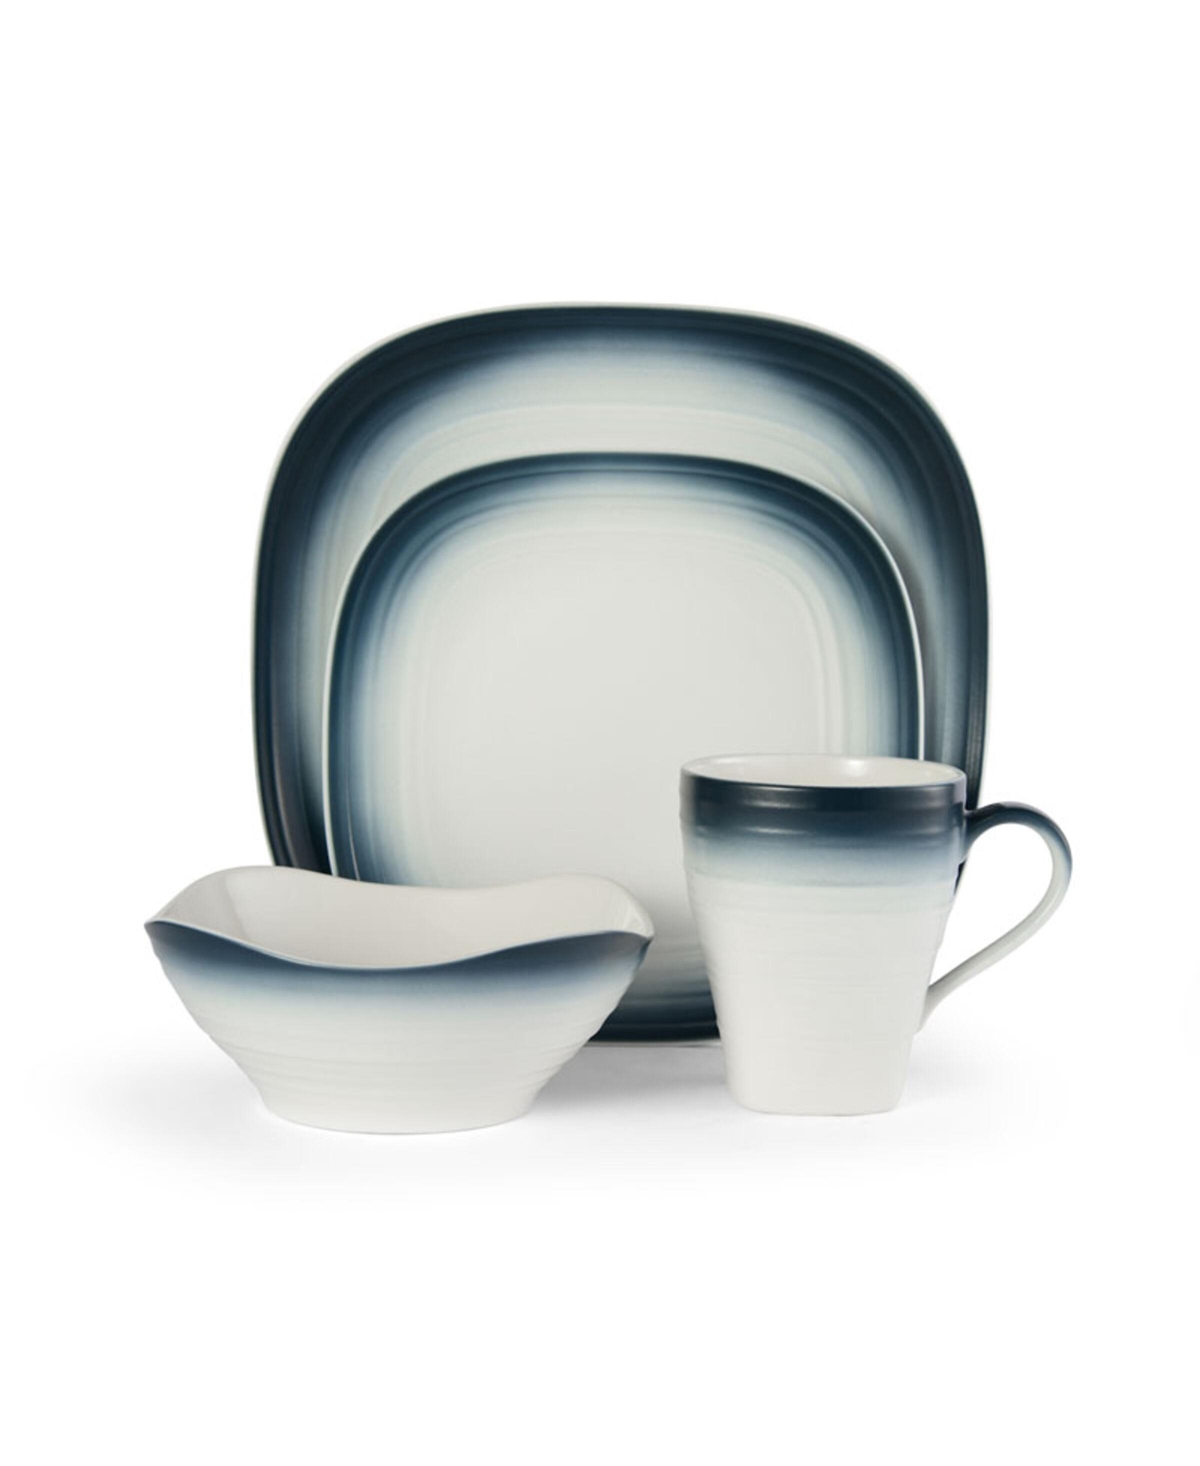 Swirl Square 4 Piece Place Setting - Blue